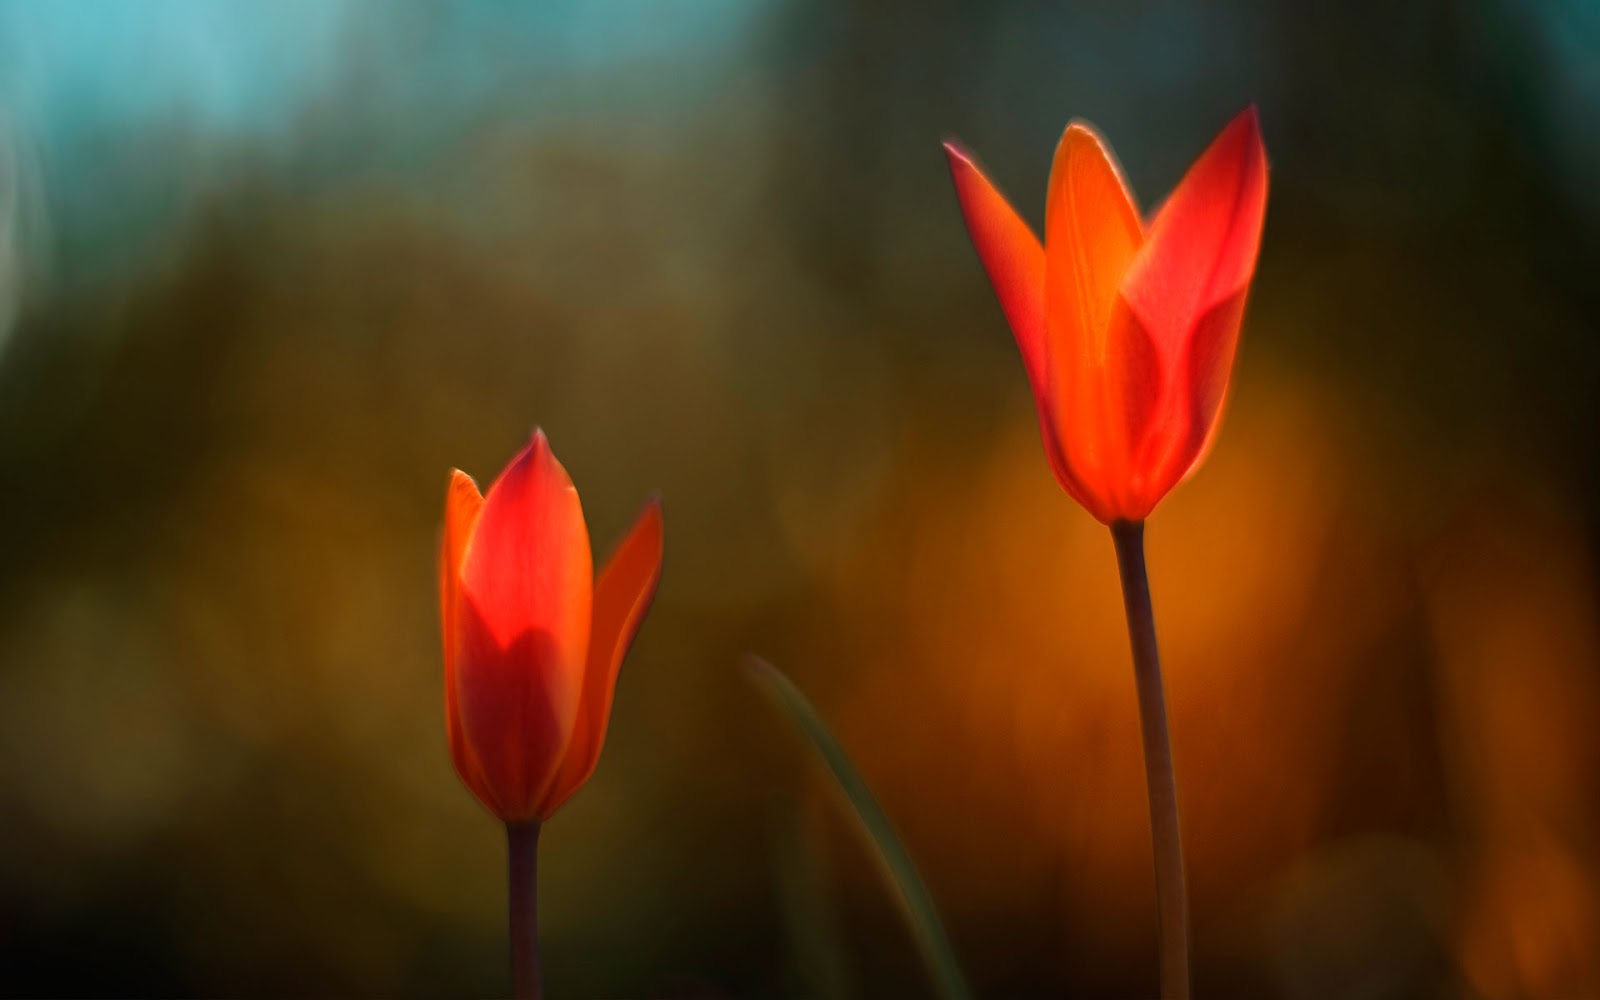 Windows 8 HD Wallpapers Flowers | Windows 8 Wallpapers Images Themes